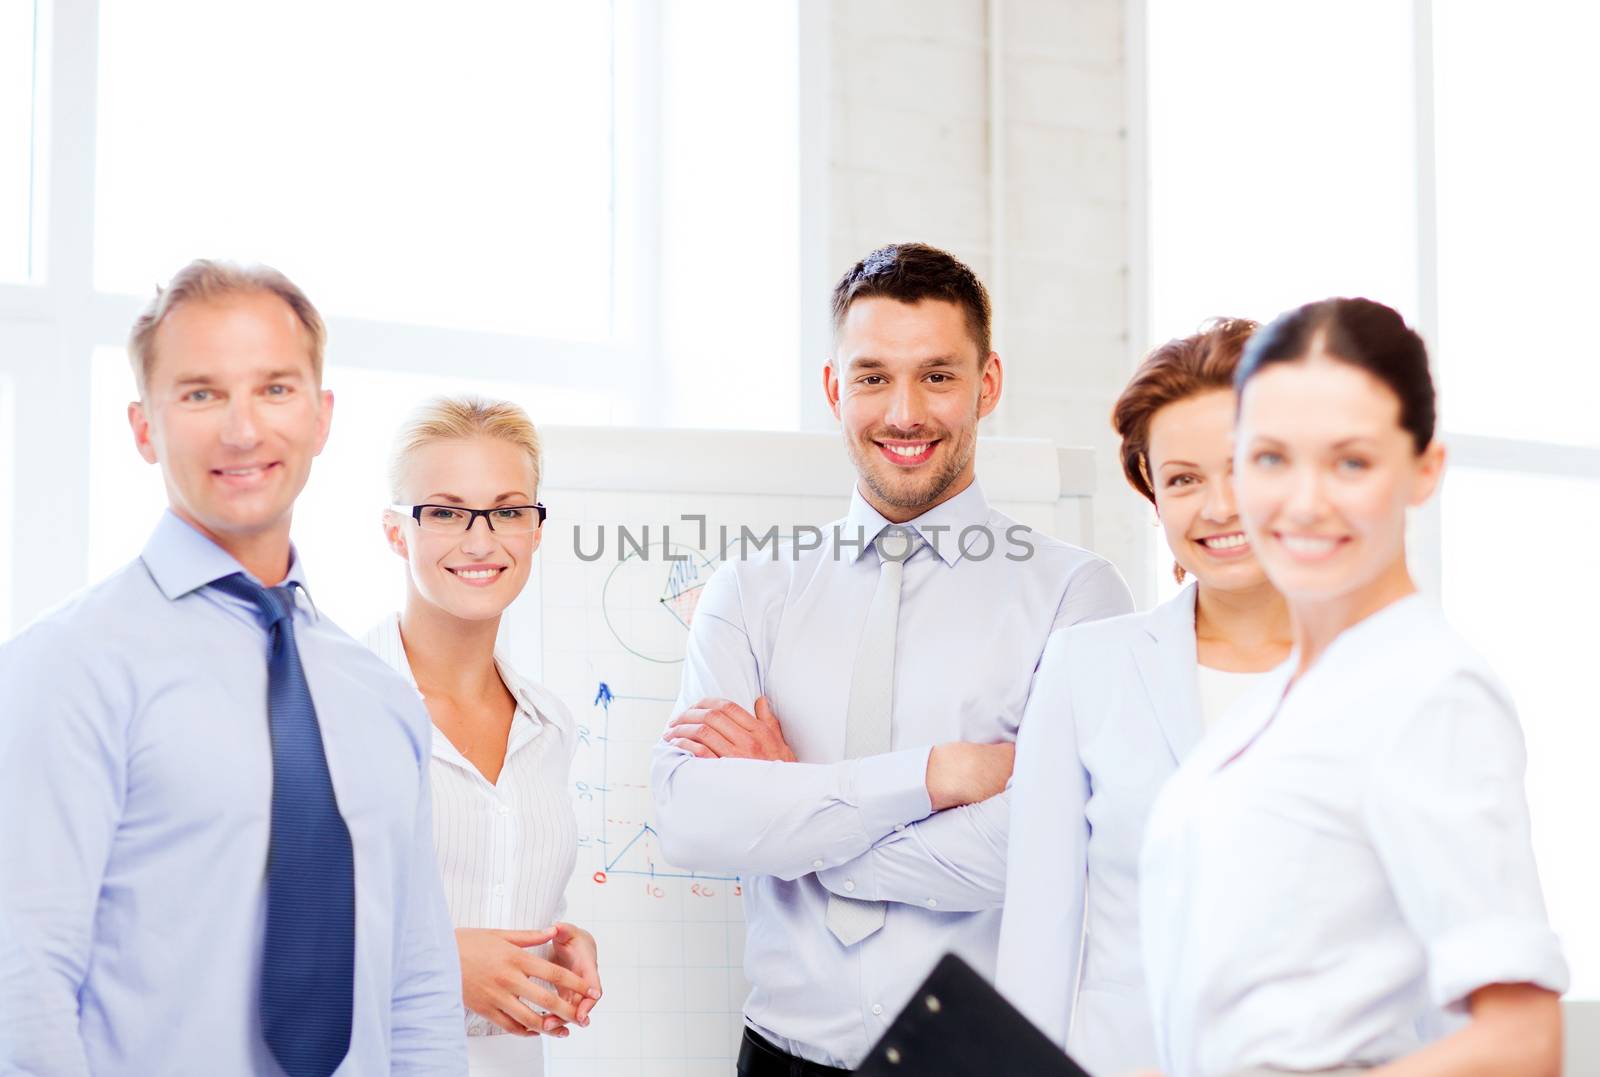 picture of friendly business team in office